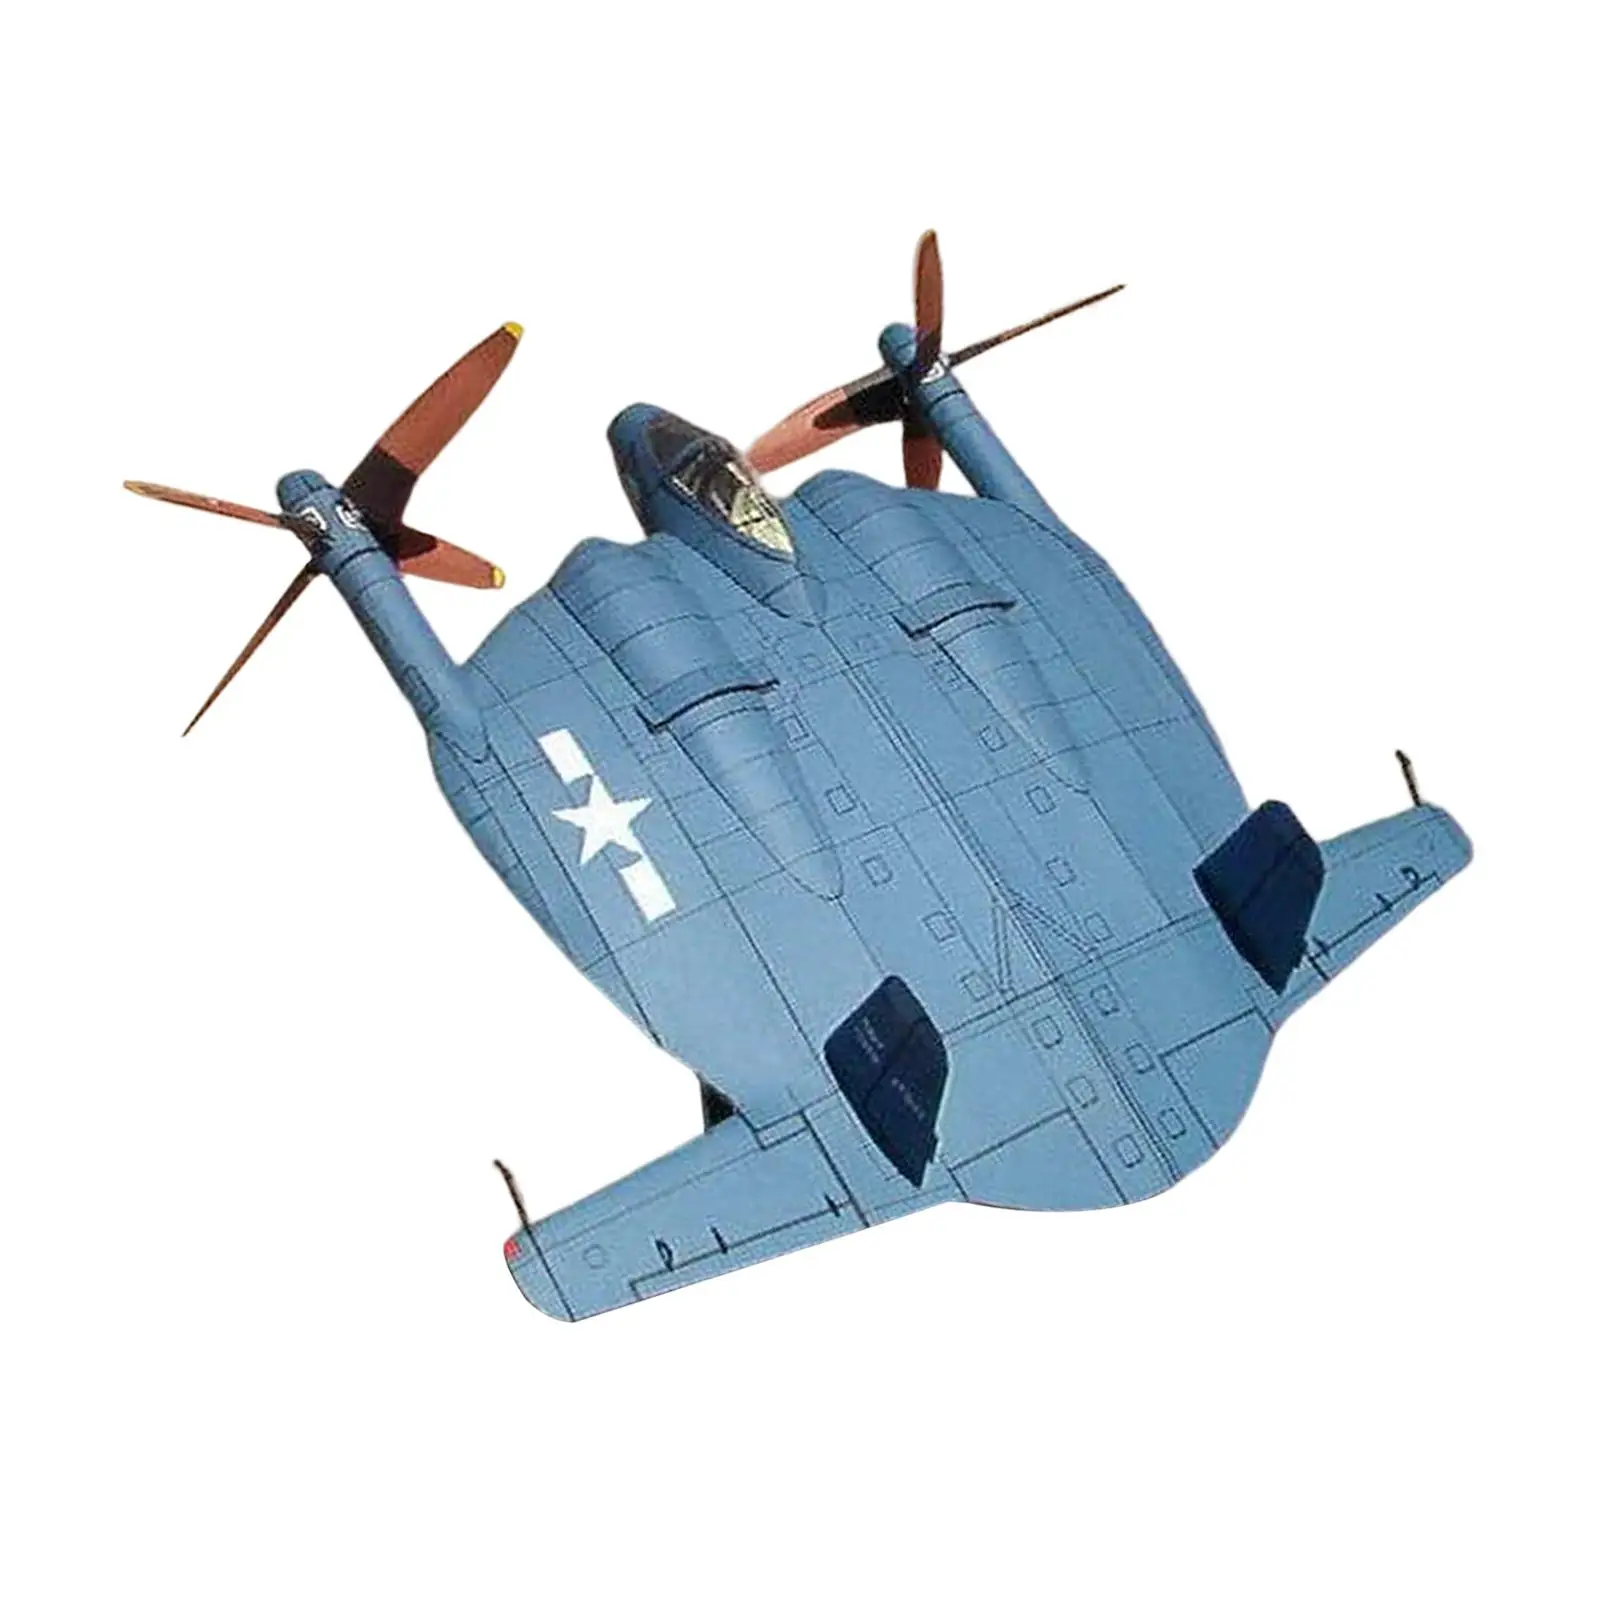 Fighter Model Toy Aircraft Plane Paper Model Handcrafts for Office Kids Gift